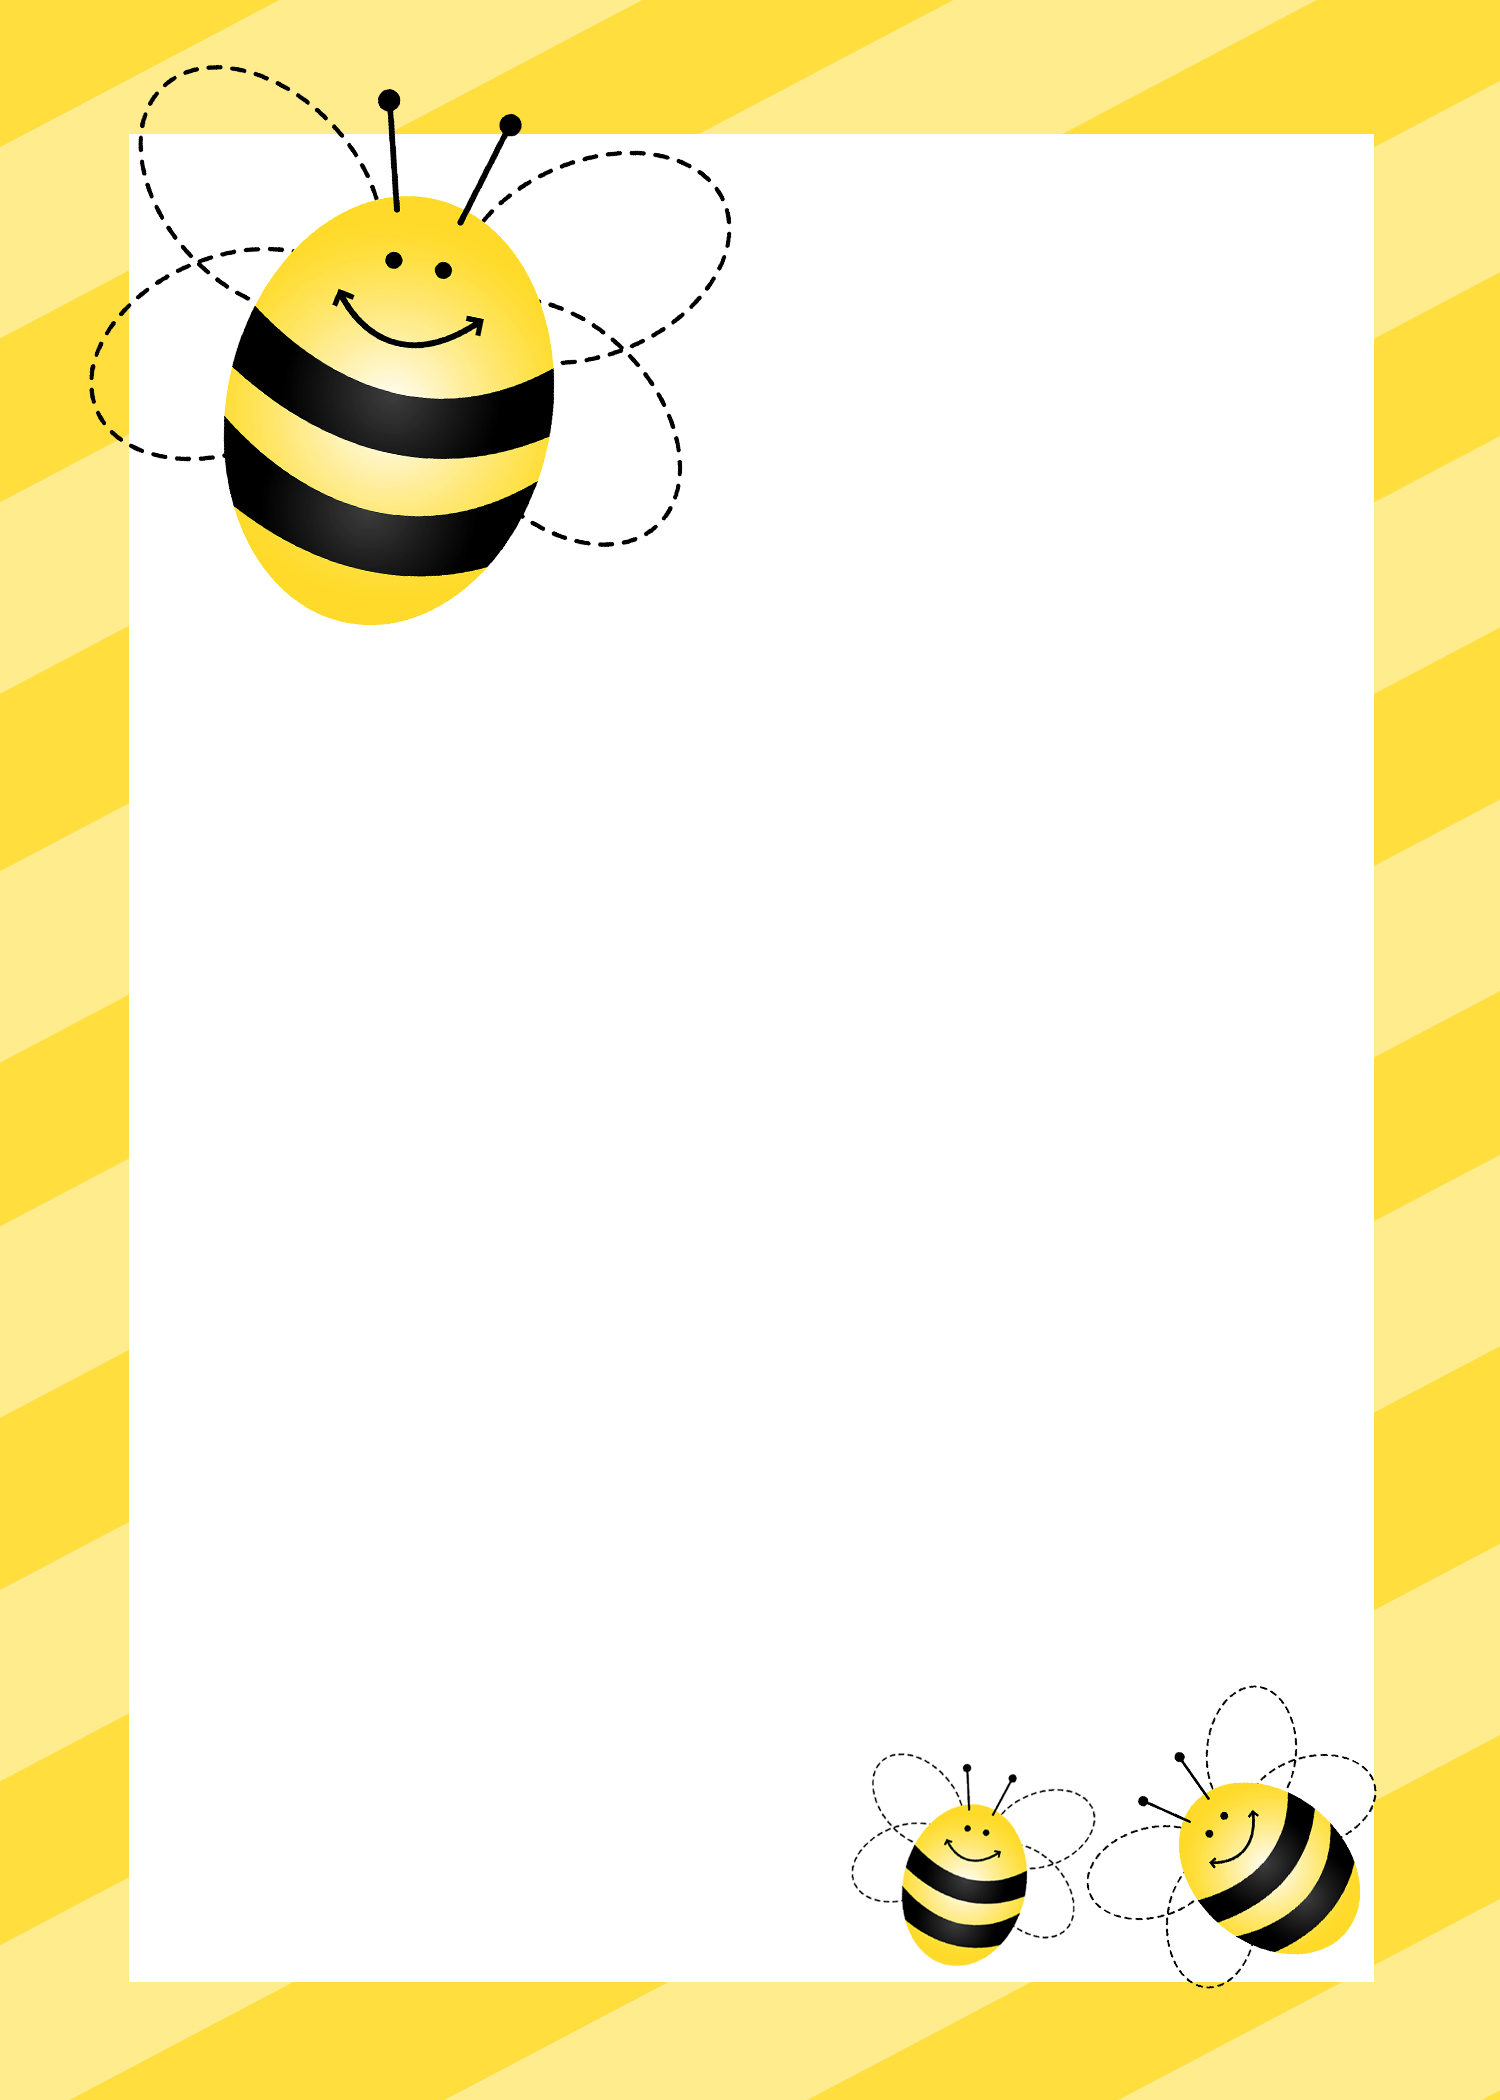 11 Spelling Bee Borders Free Cliparts That You Can Download To You